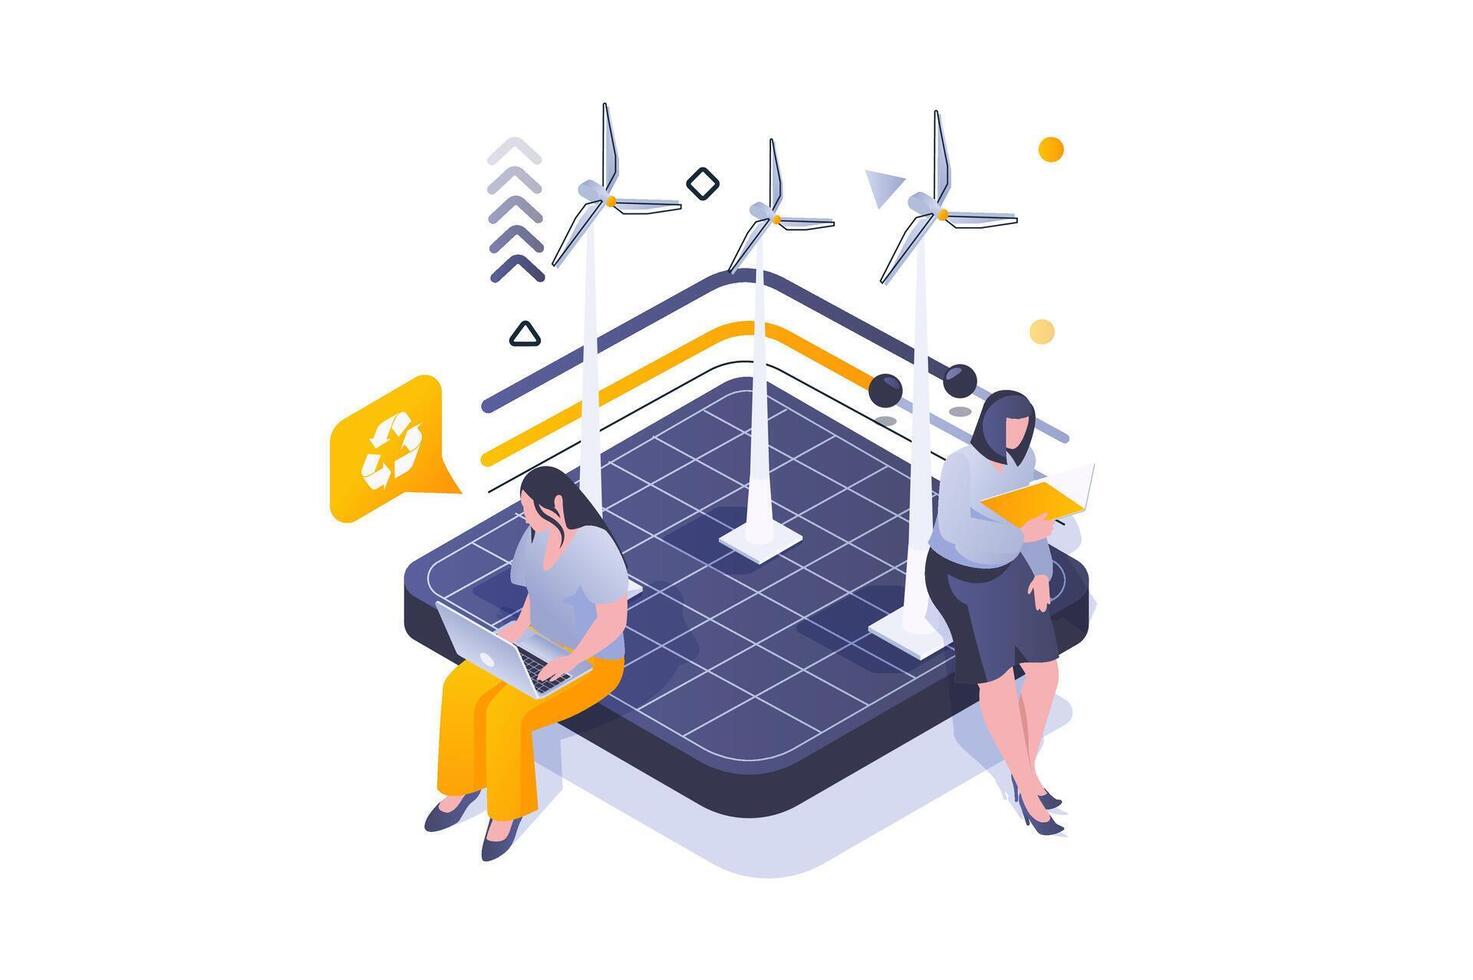 Eco lifestyle concept in 3d isometric design. Wind turbines station for energy generation and using renewable alternative sources. Vector illustration with isometric people scene for web graphic